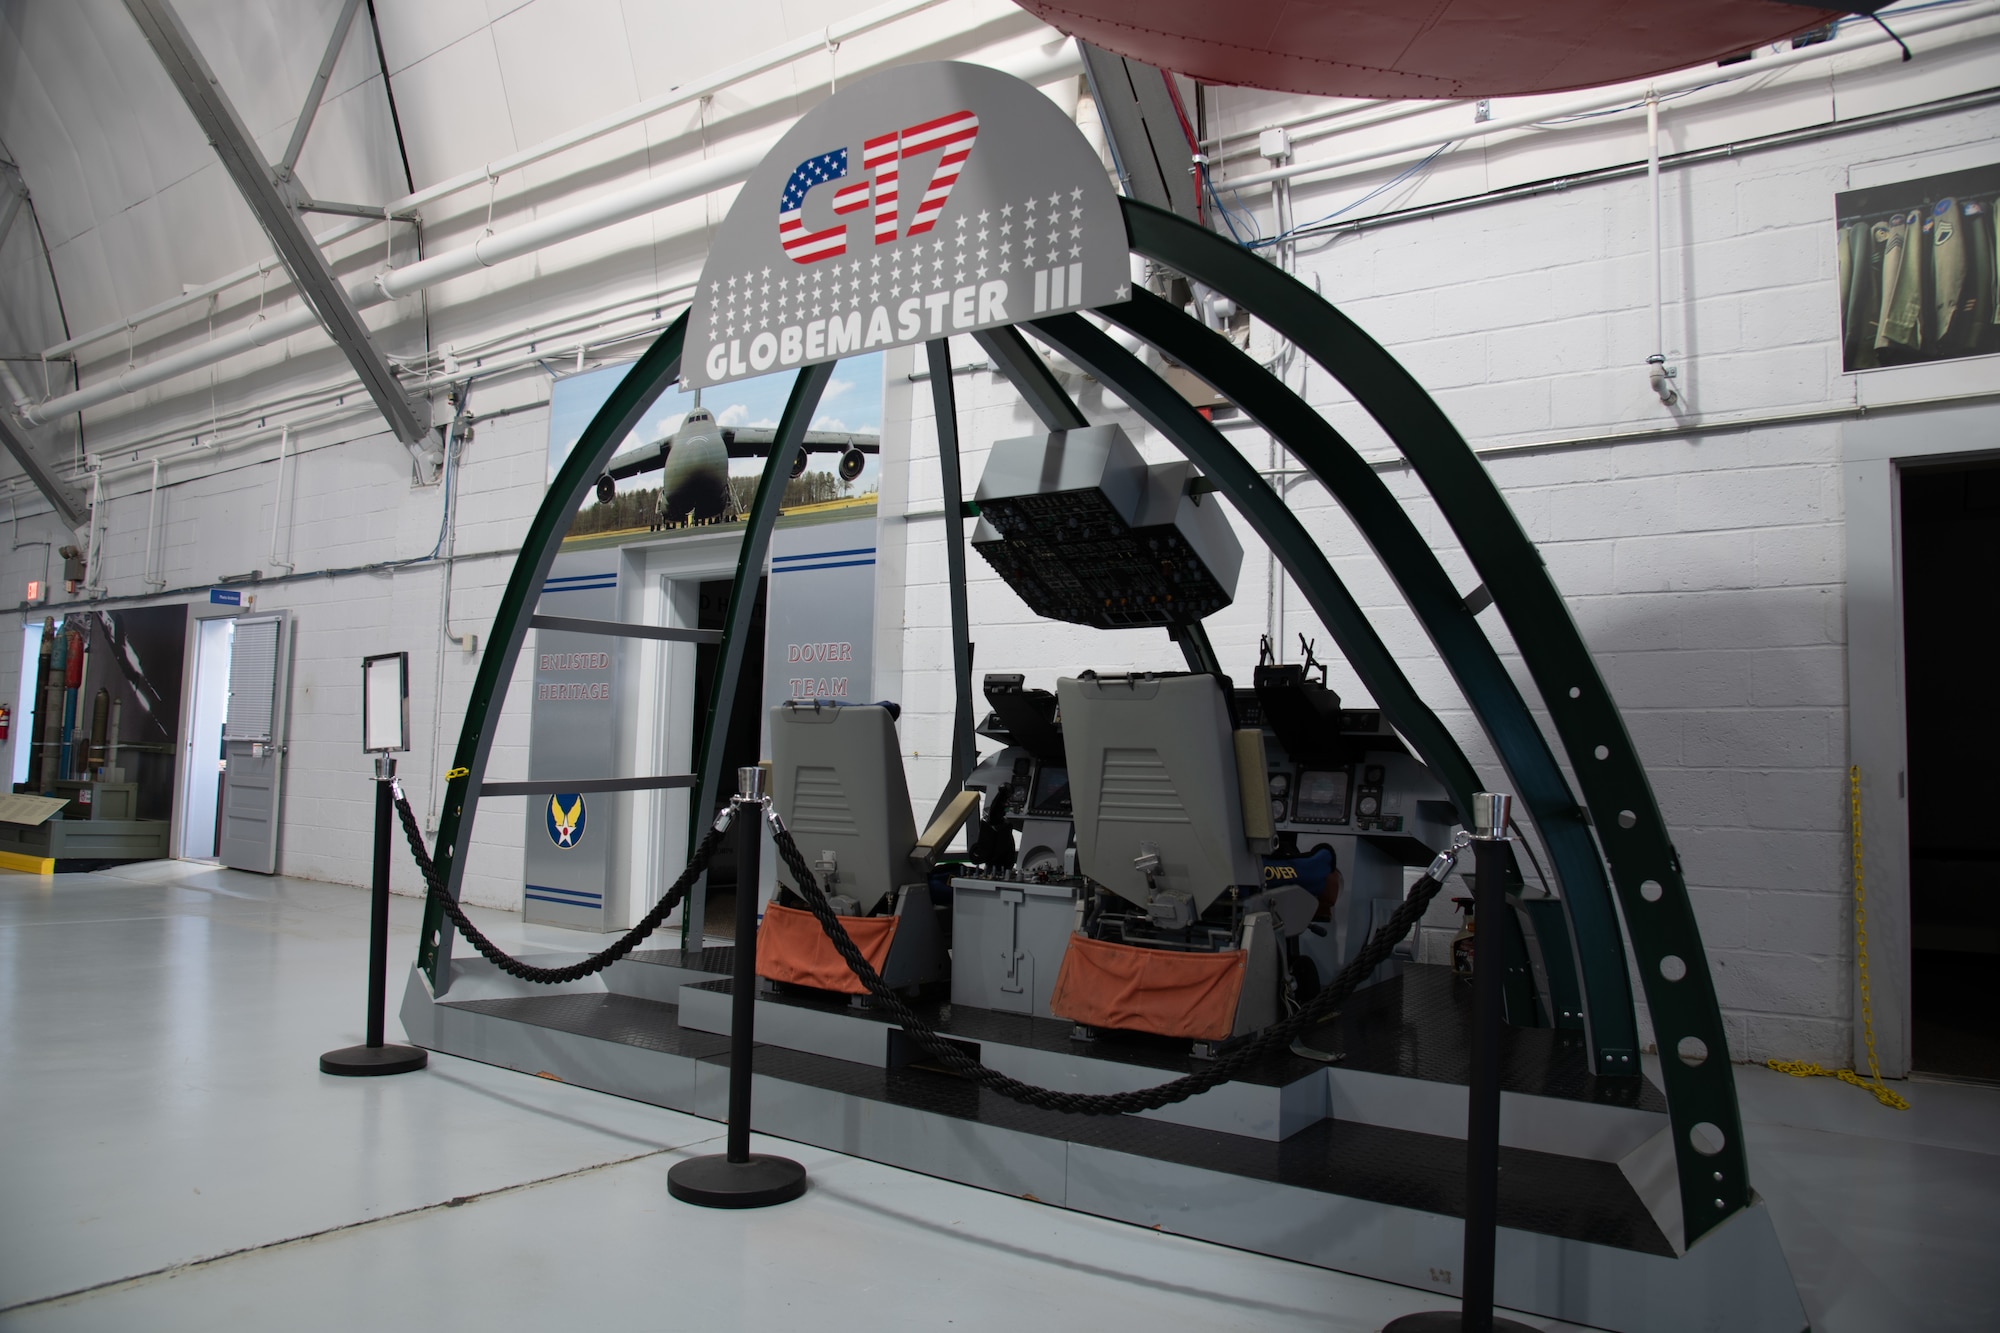 The C-17 Globemaster III flight deck display at the Air Mobility Command Museum offers visitors an inside look at a C-17 cockpit. The Air Mobility Command Museum at Dover Air Force Base, Delaware, is home to many aircraft dating back to World War I. (U.S. Air Force photo by Senior Airman Marco A. Gomez)